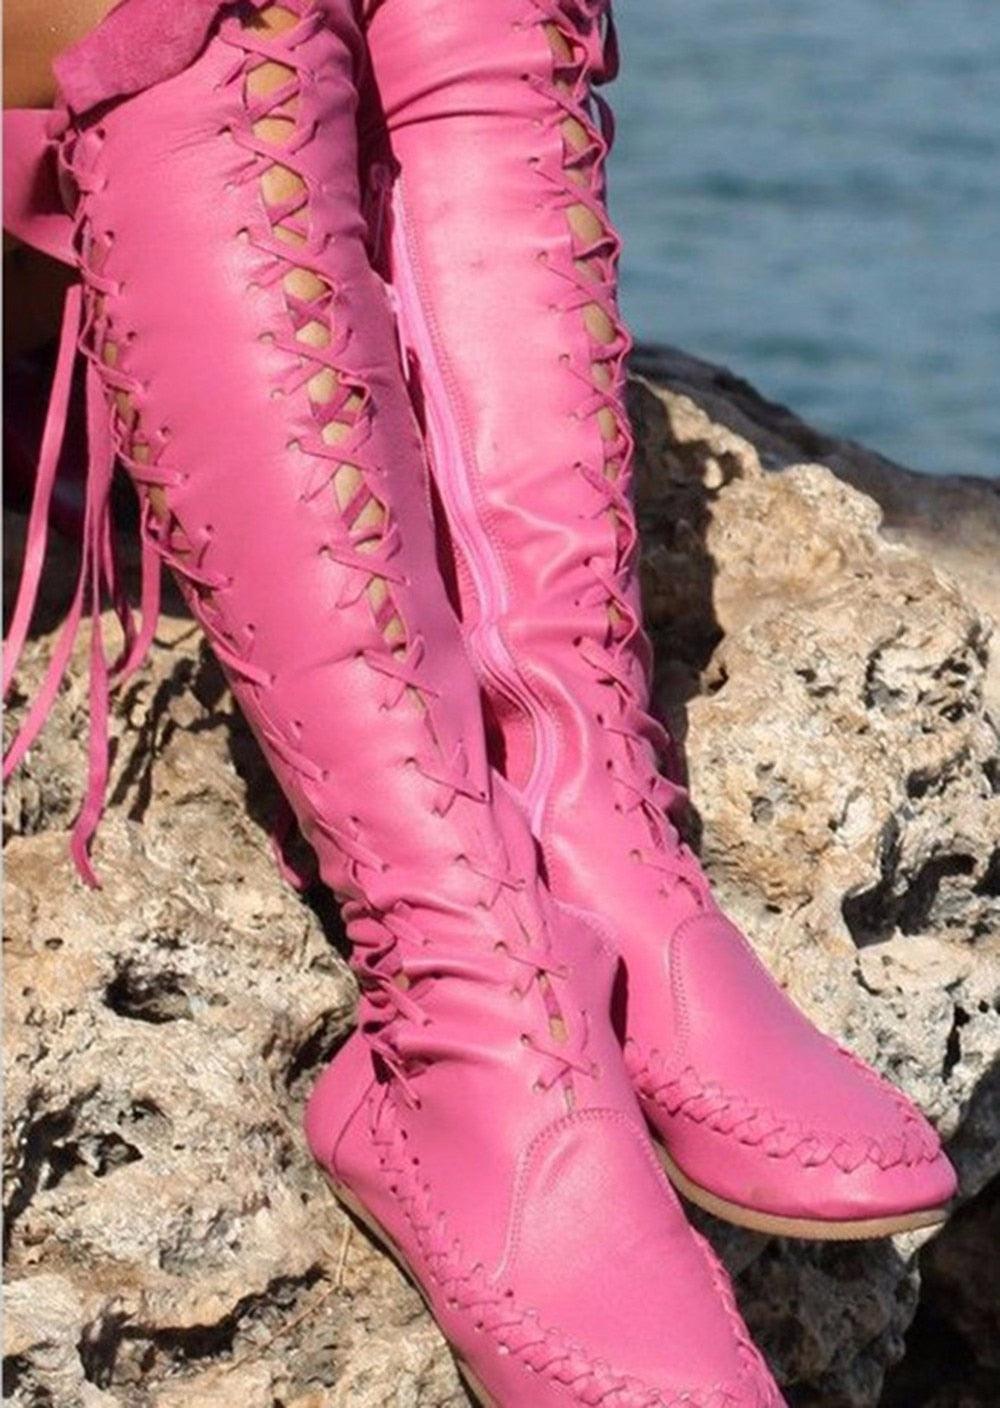 New PU lace up high long boots round head Roman flat women shoes summer Martin boots ladies over the knee boots - Plushlegacy